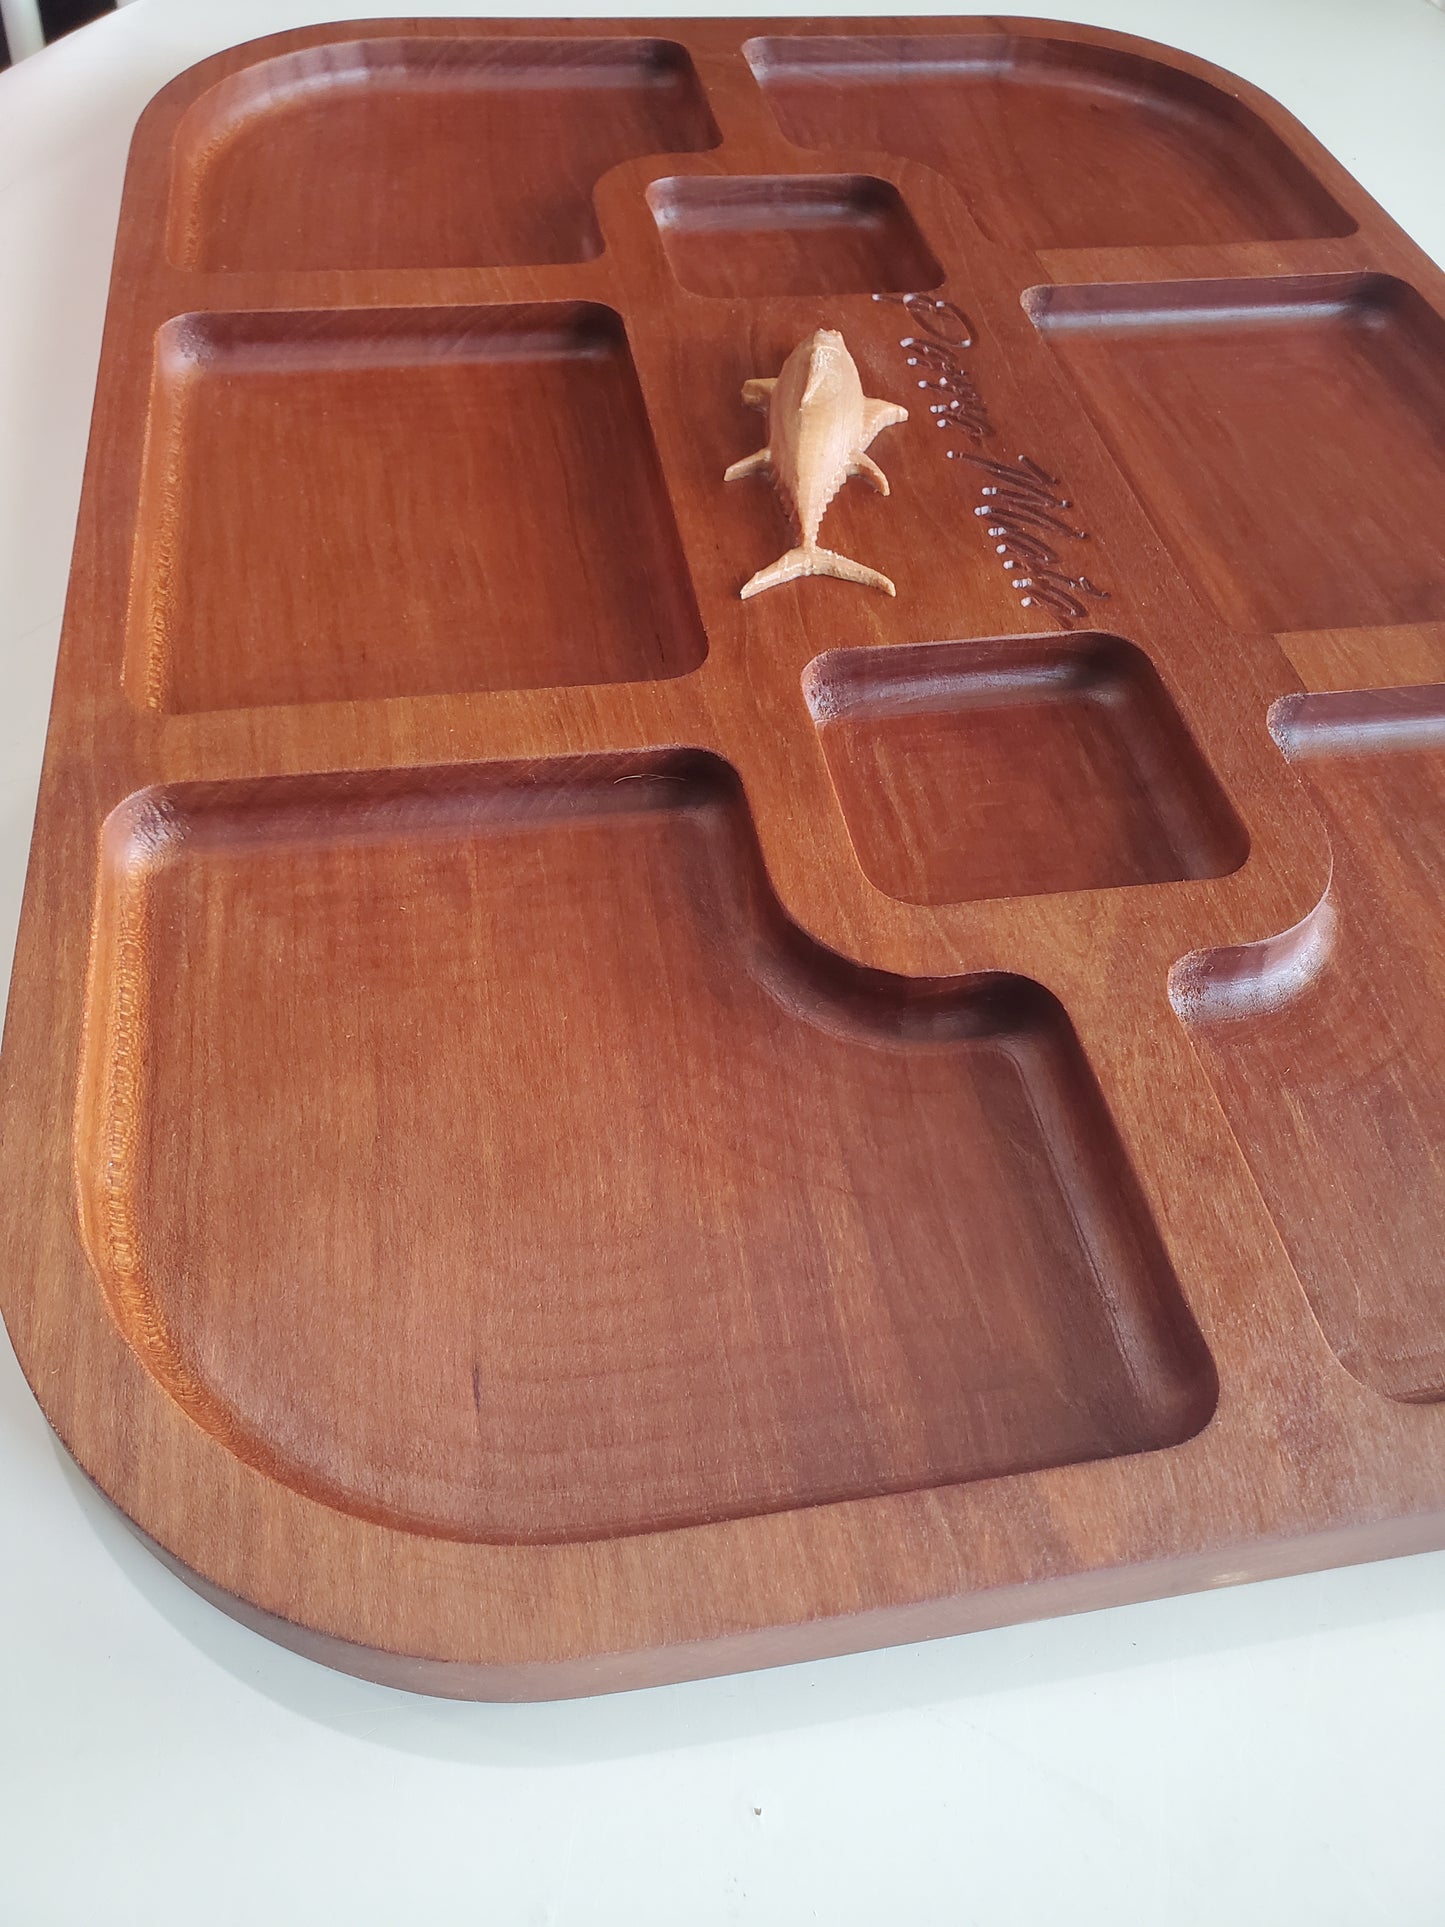 Large cherry serving tray - 13 x 19